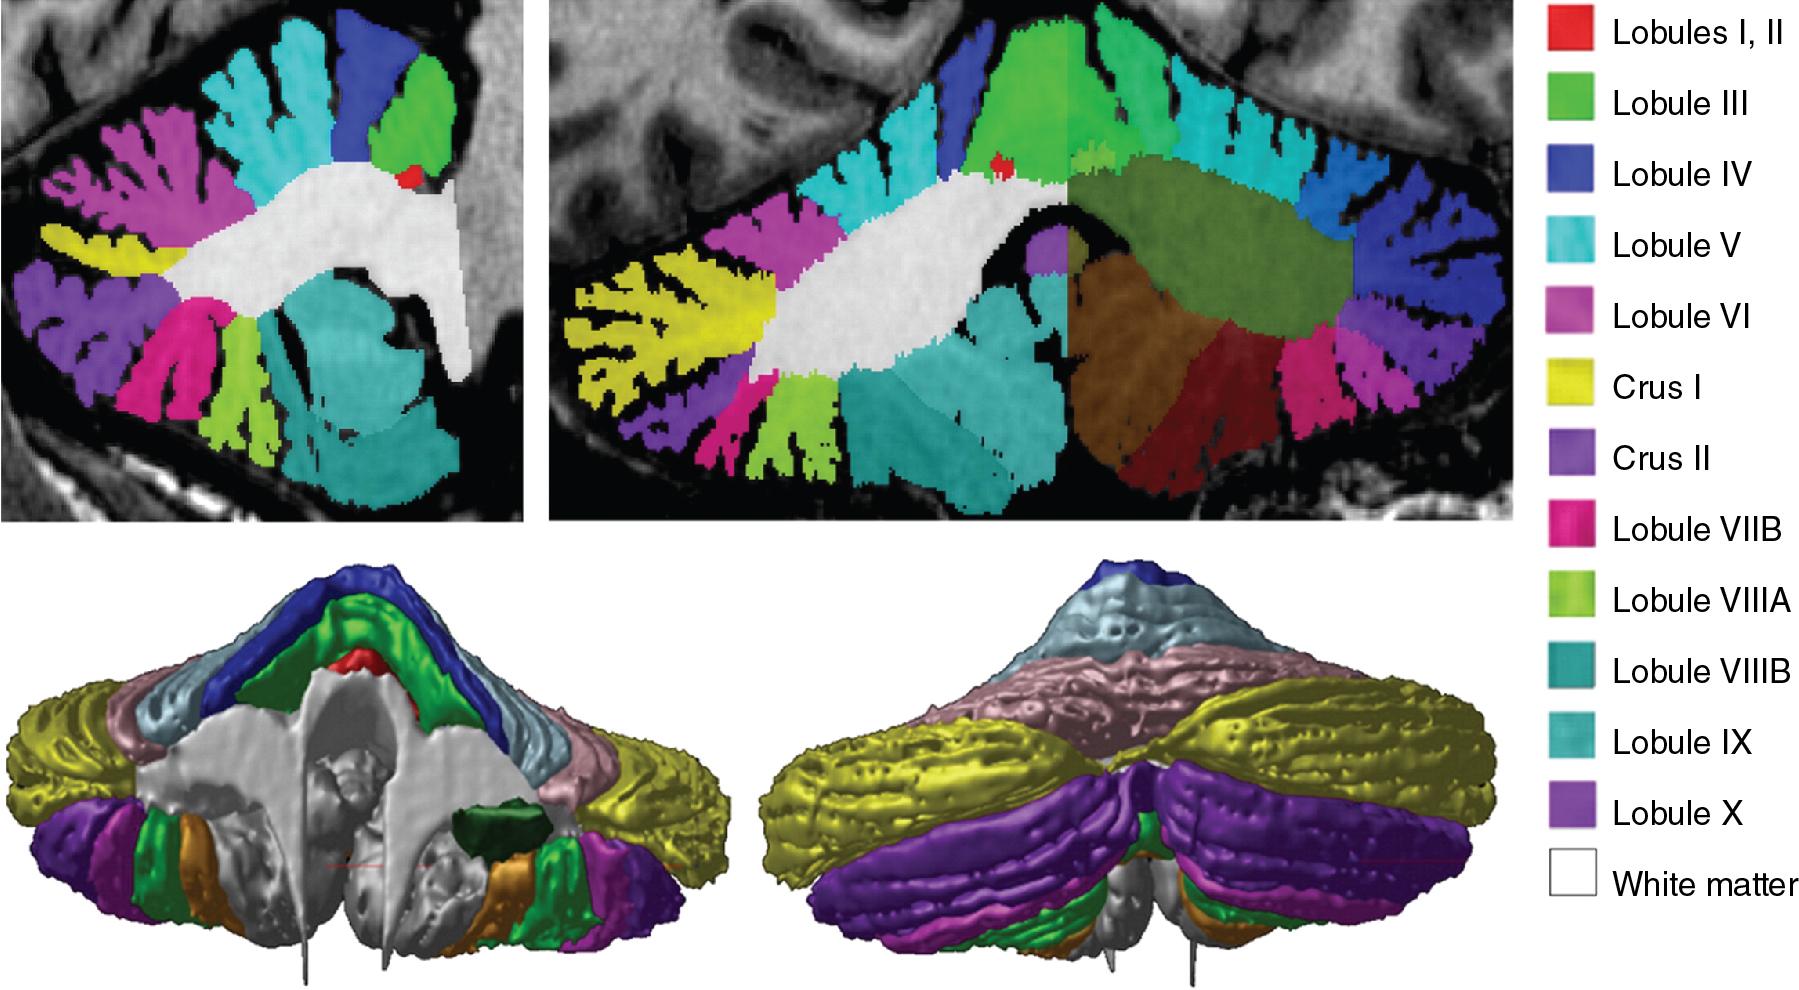 Fig. 5.4, Segmented MRI T1-weighted images of the adult cerebellum. Top panel: Cerebellar lobules defined according to fissures with the left and right hemispheres containing a different set of labels in a sagittal ( left ) and coronal ( right ) section. Bottom panel: 3D surface representation of the cerebellar lobules.